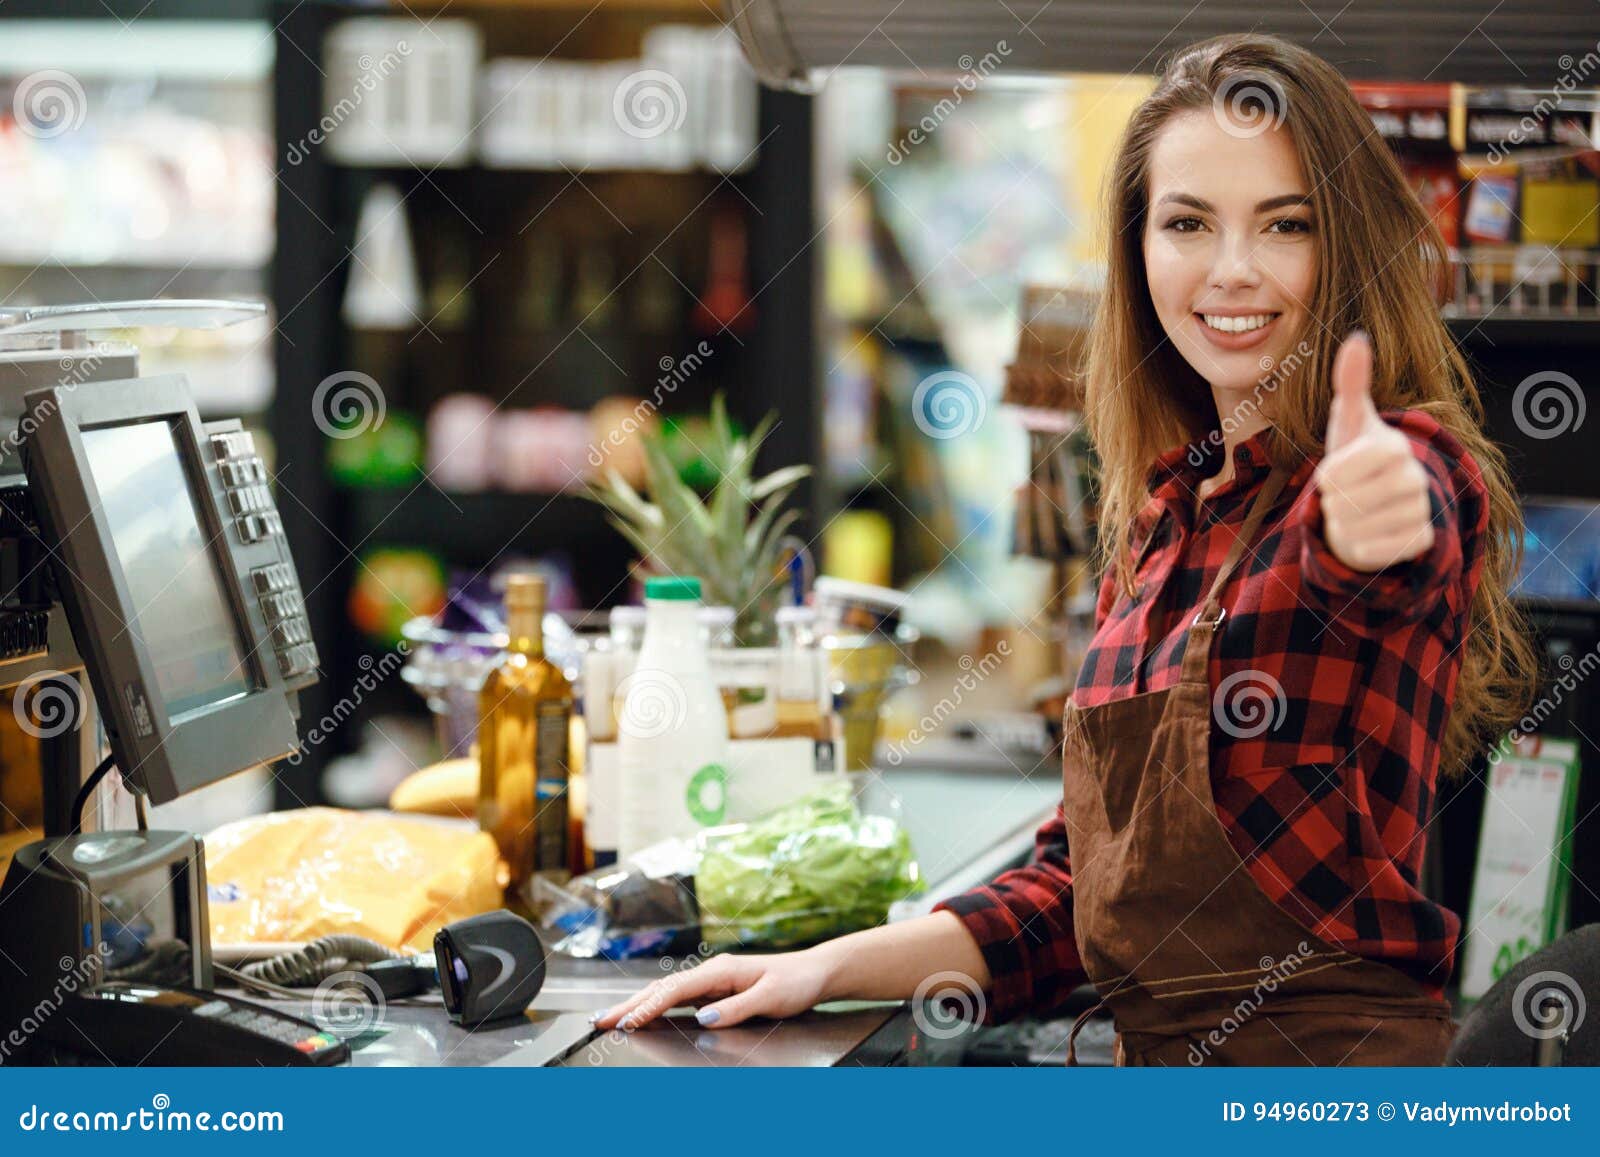 cheerful cashier woman on workspace showing thumbs up.